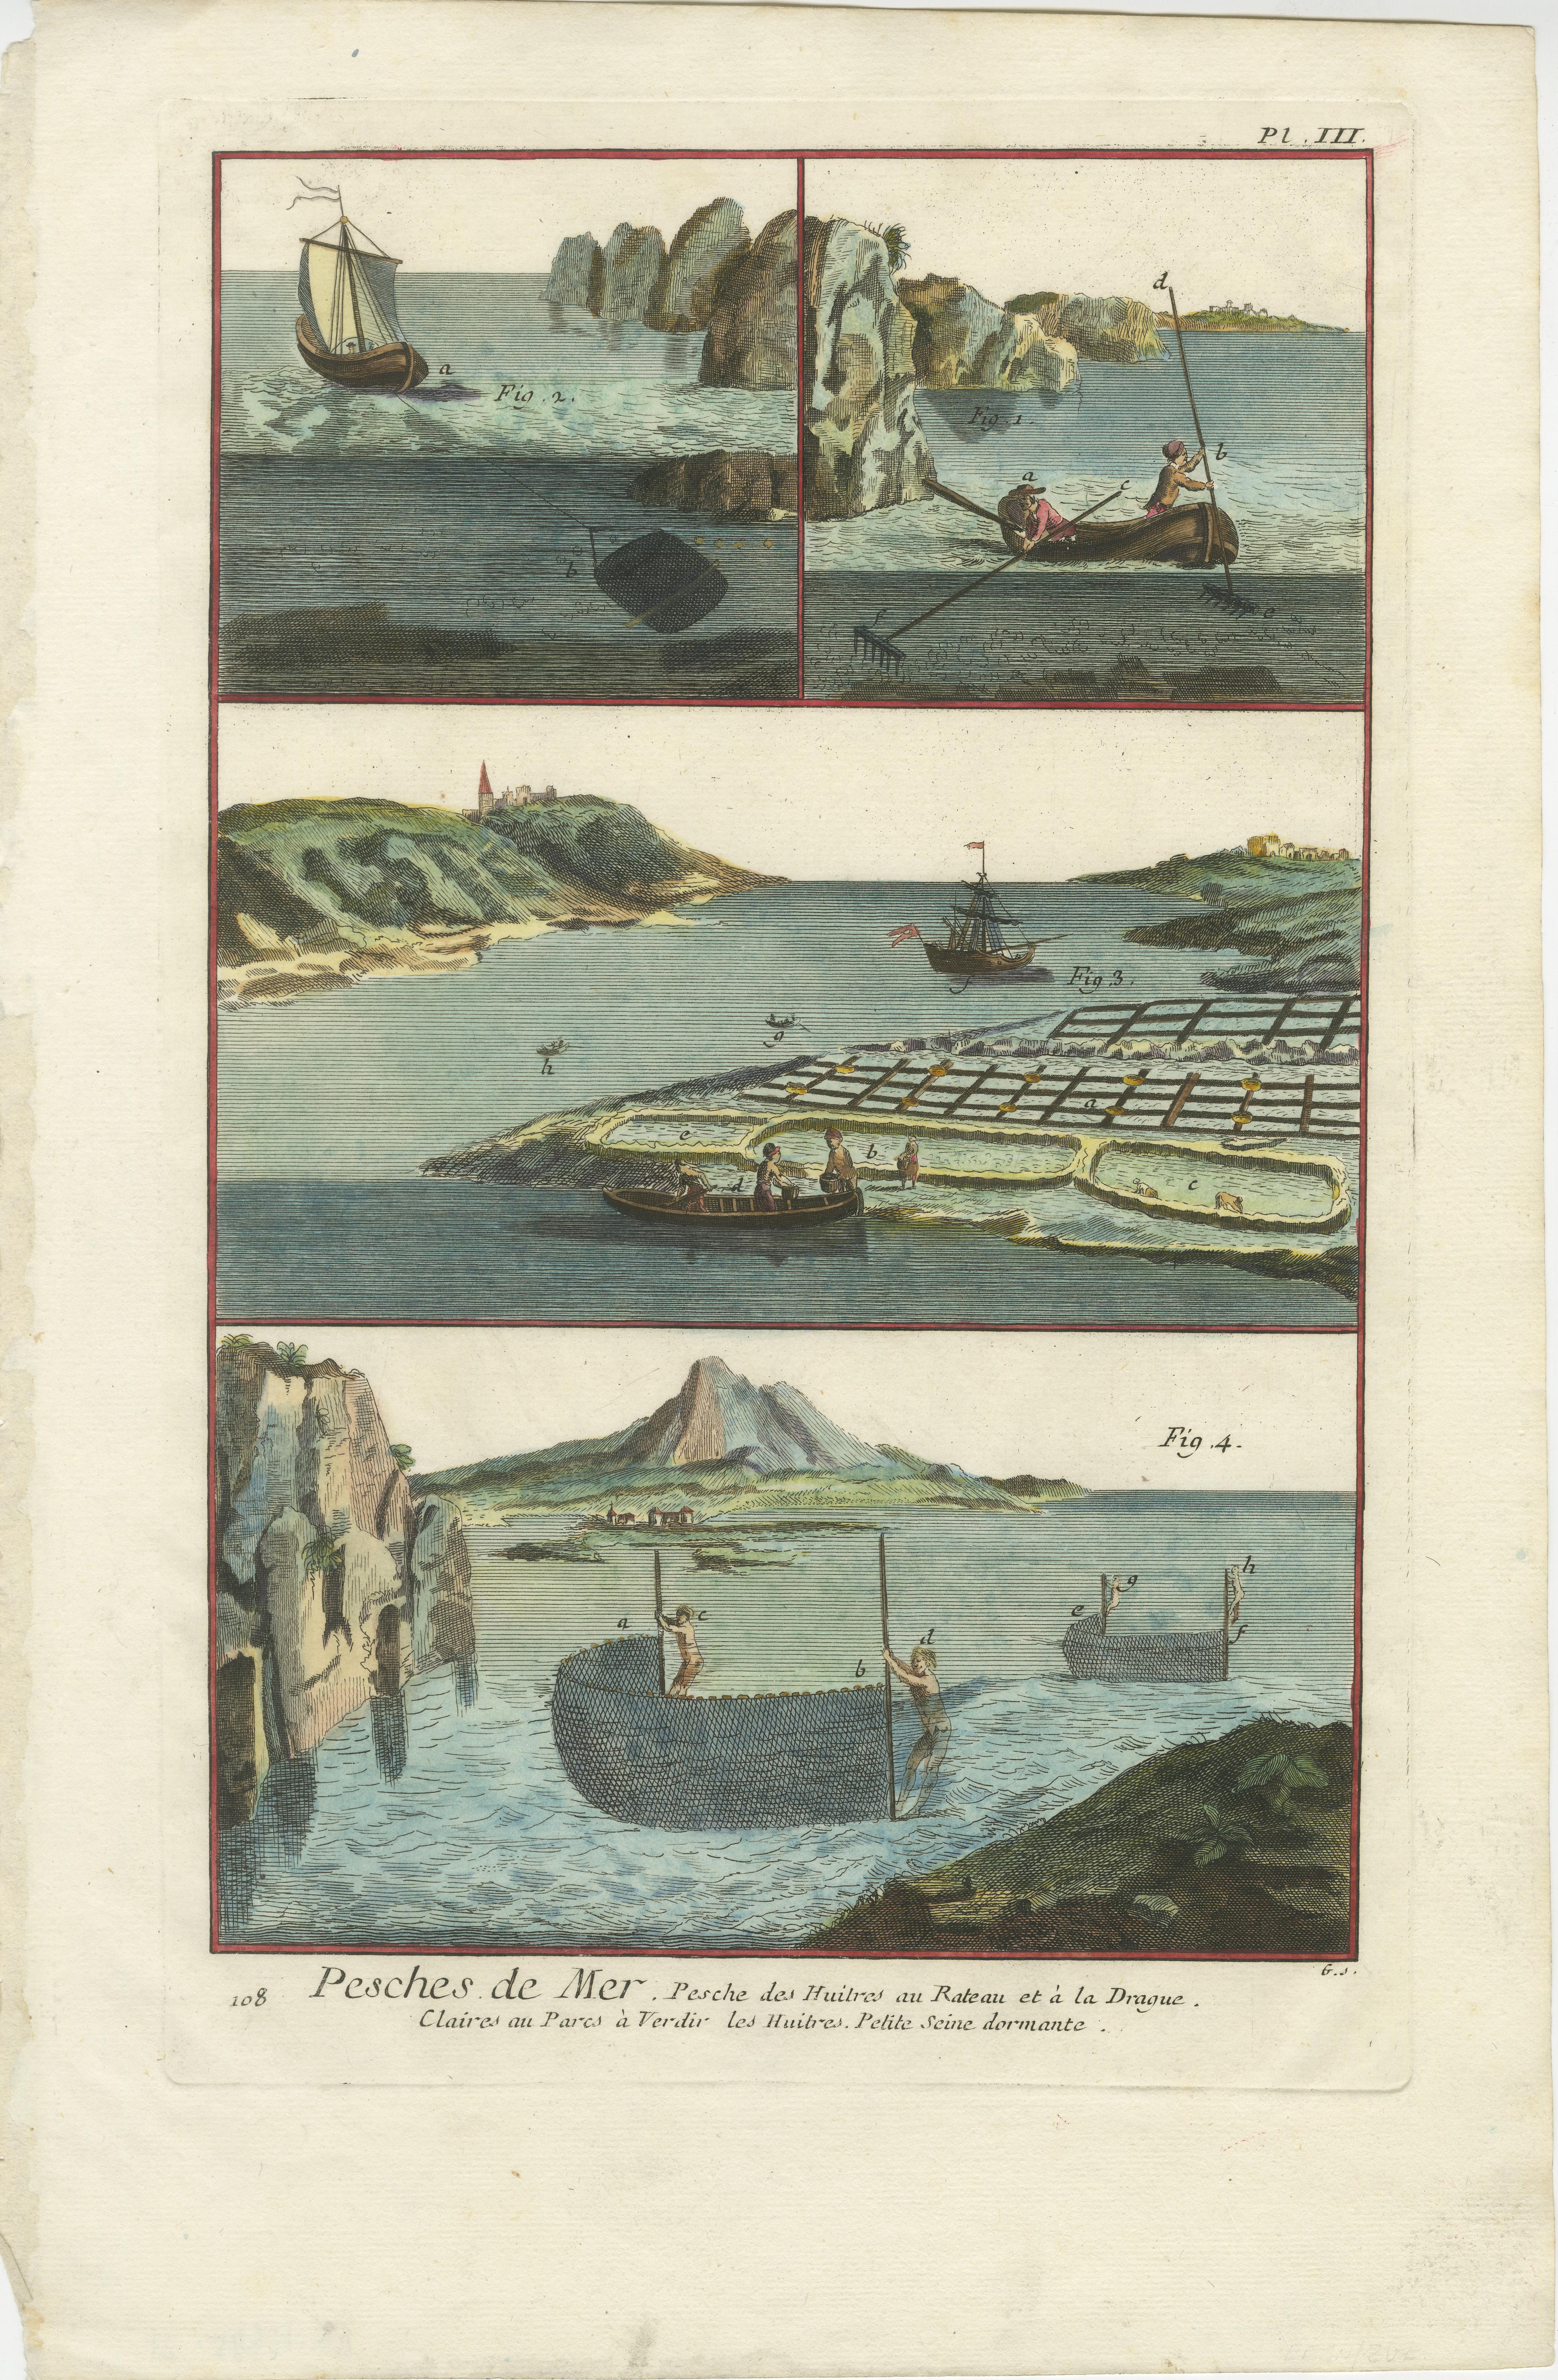 These antique engravings are illustrations from the monumental work of the 